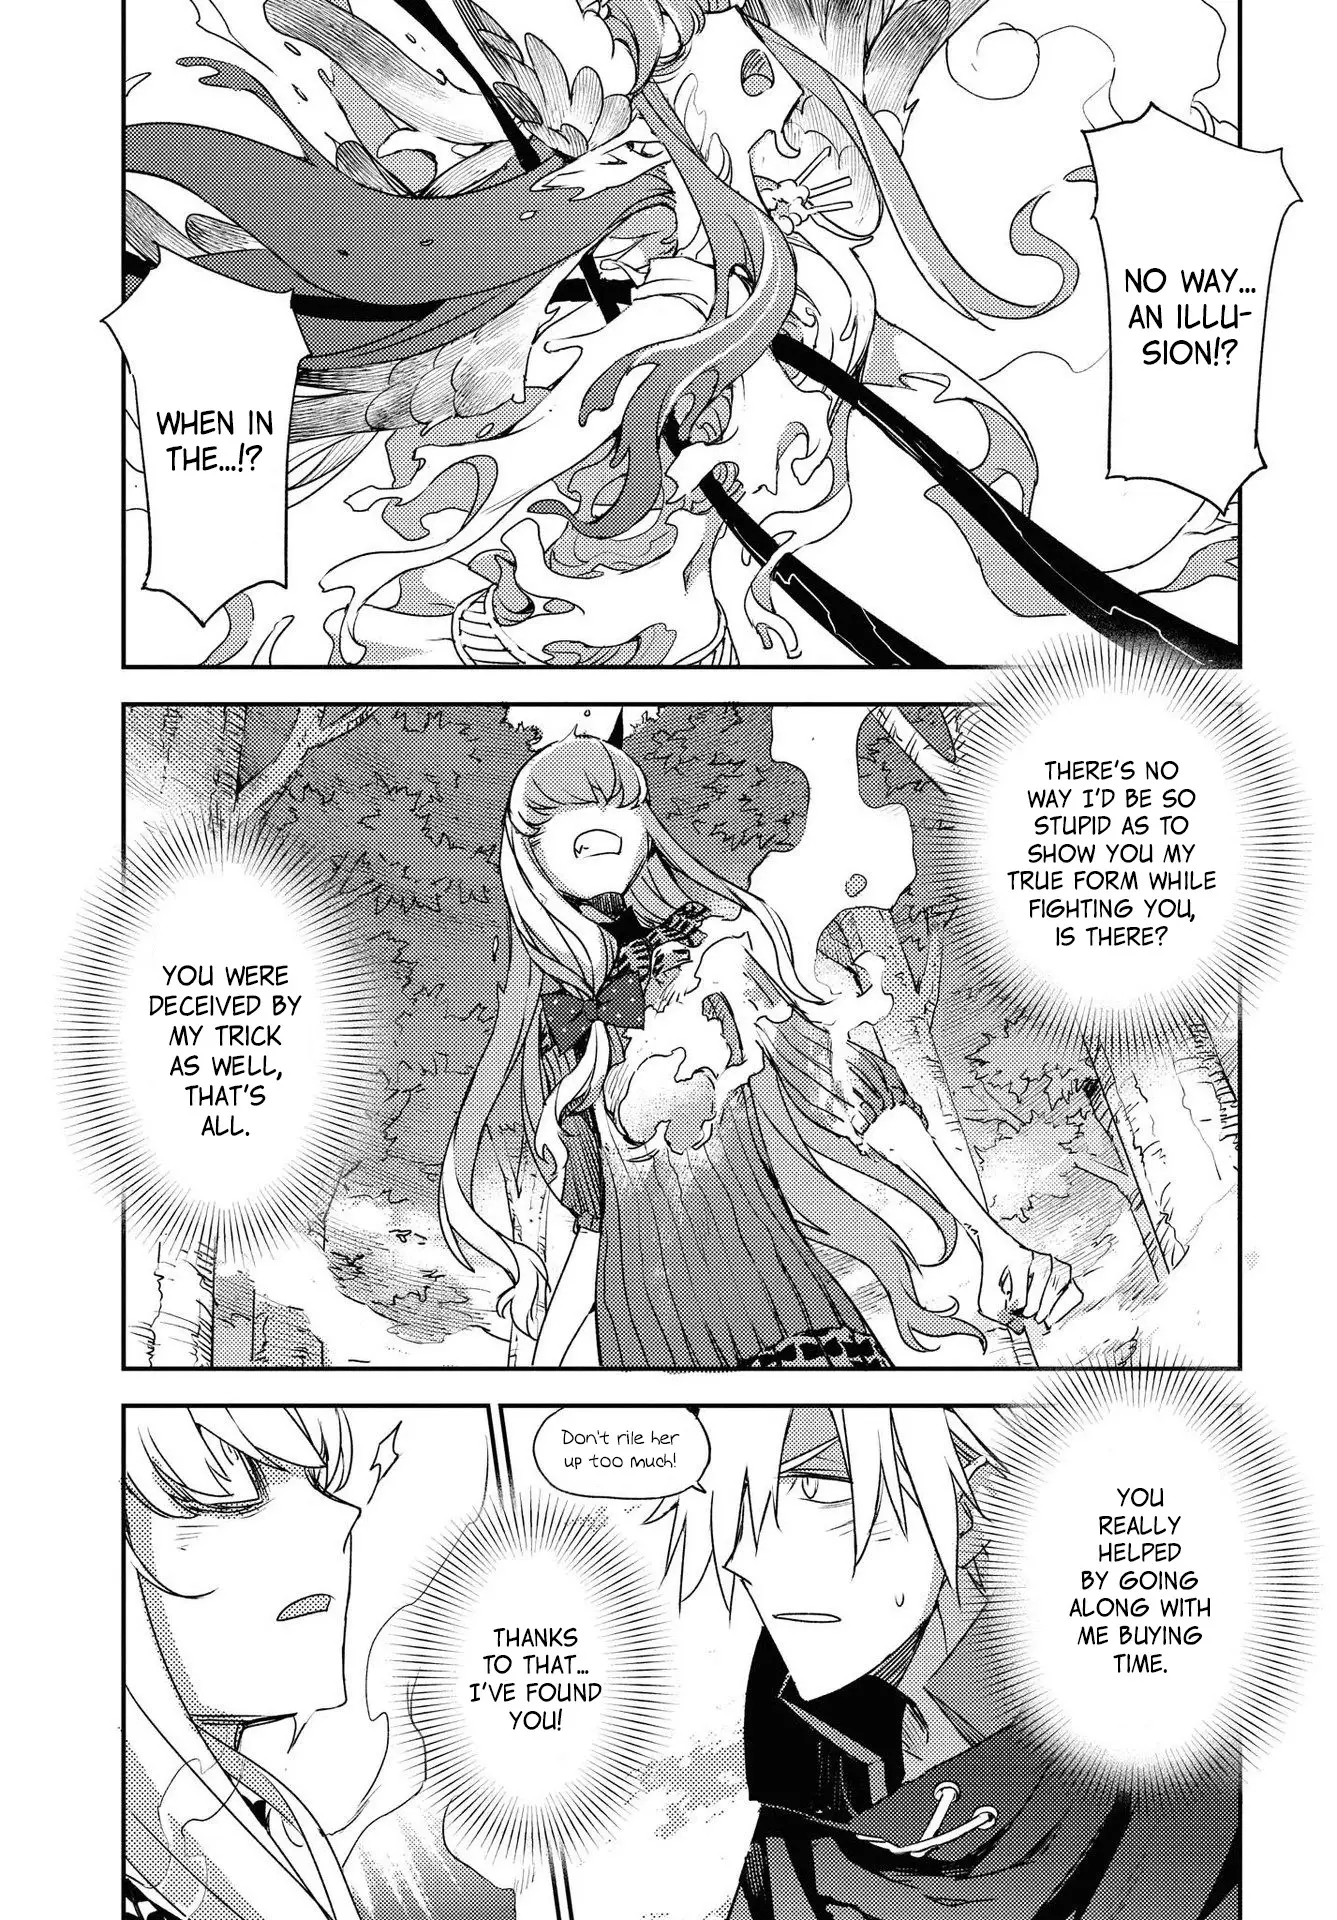 Fate/grand Order: Epic Of Remnant - Subspecies Singularity Iv: Taboo Advent Salem: Salem Of Heresy - 21 page 11-fb035728